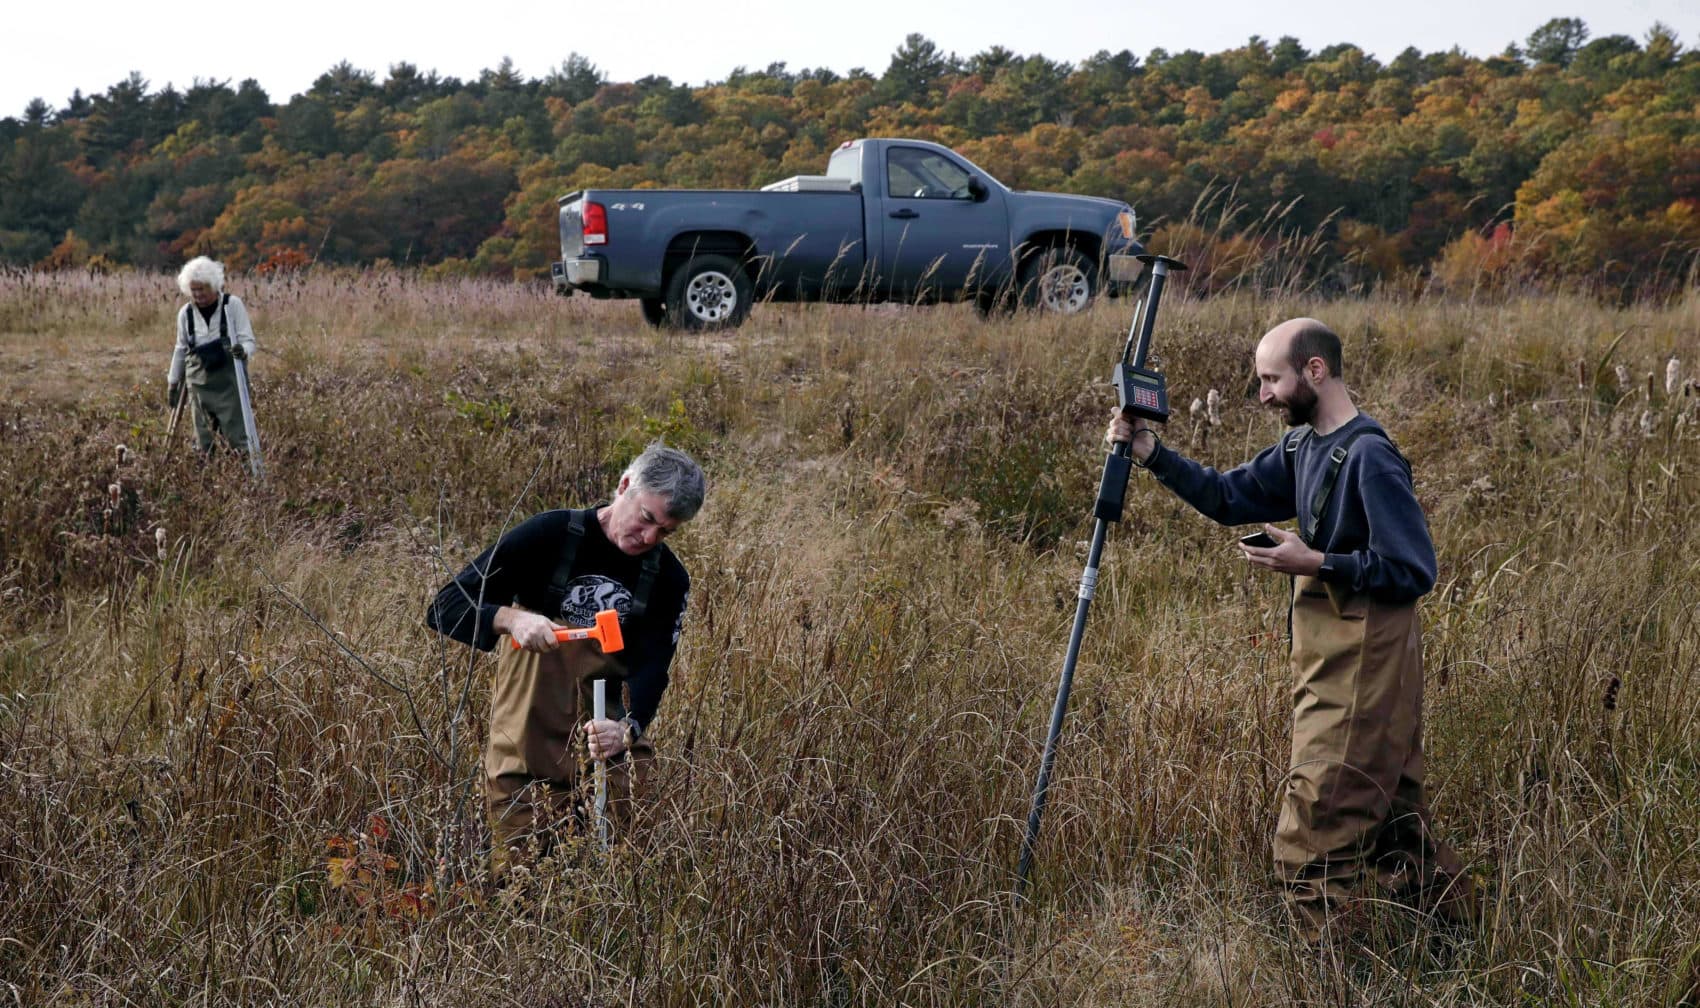 In this Thursday Nov. 1, 2018 photo, Joe Paradiso, Director of the Responsive Environment group at the MIT Media Lab, center, drives a support post for a sensor unit as Brian Mayton, a research assistant at the Responsive Environment group, right, prepares to map the device's global position at a marshland in Plymouth, Mass., which is equipped with wireless sensors, cameras and microphones to create a virtual reality world inspired by nature's rhythms. Researchers at the Massachusetts Institute of Technology hope that by live-streaming data, sights and sounds at the Tidmarsh Wildlife Sanctuary, they can help scientists understand wildlife restoration techniques and let other virtual visitors experience nature remotely. At rear left is Glorianna Davenport, president of the Living Observatory and co-founder of the MIT Media Lab. (Charles Krupa/AP)